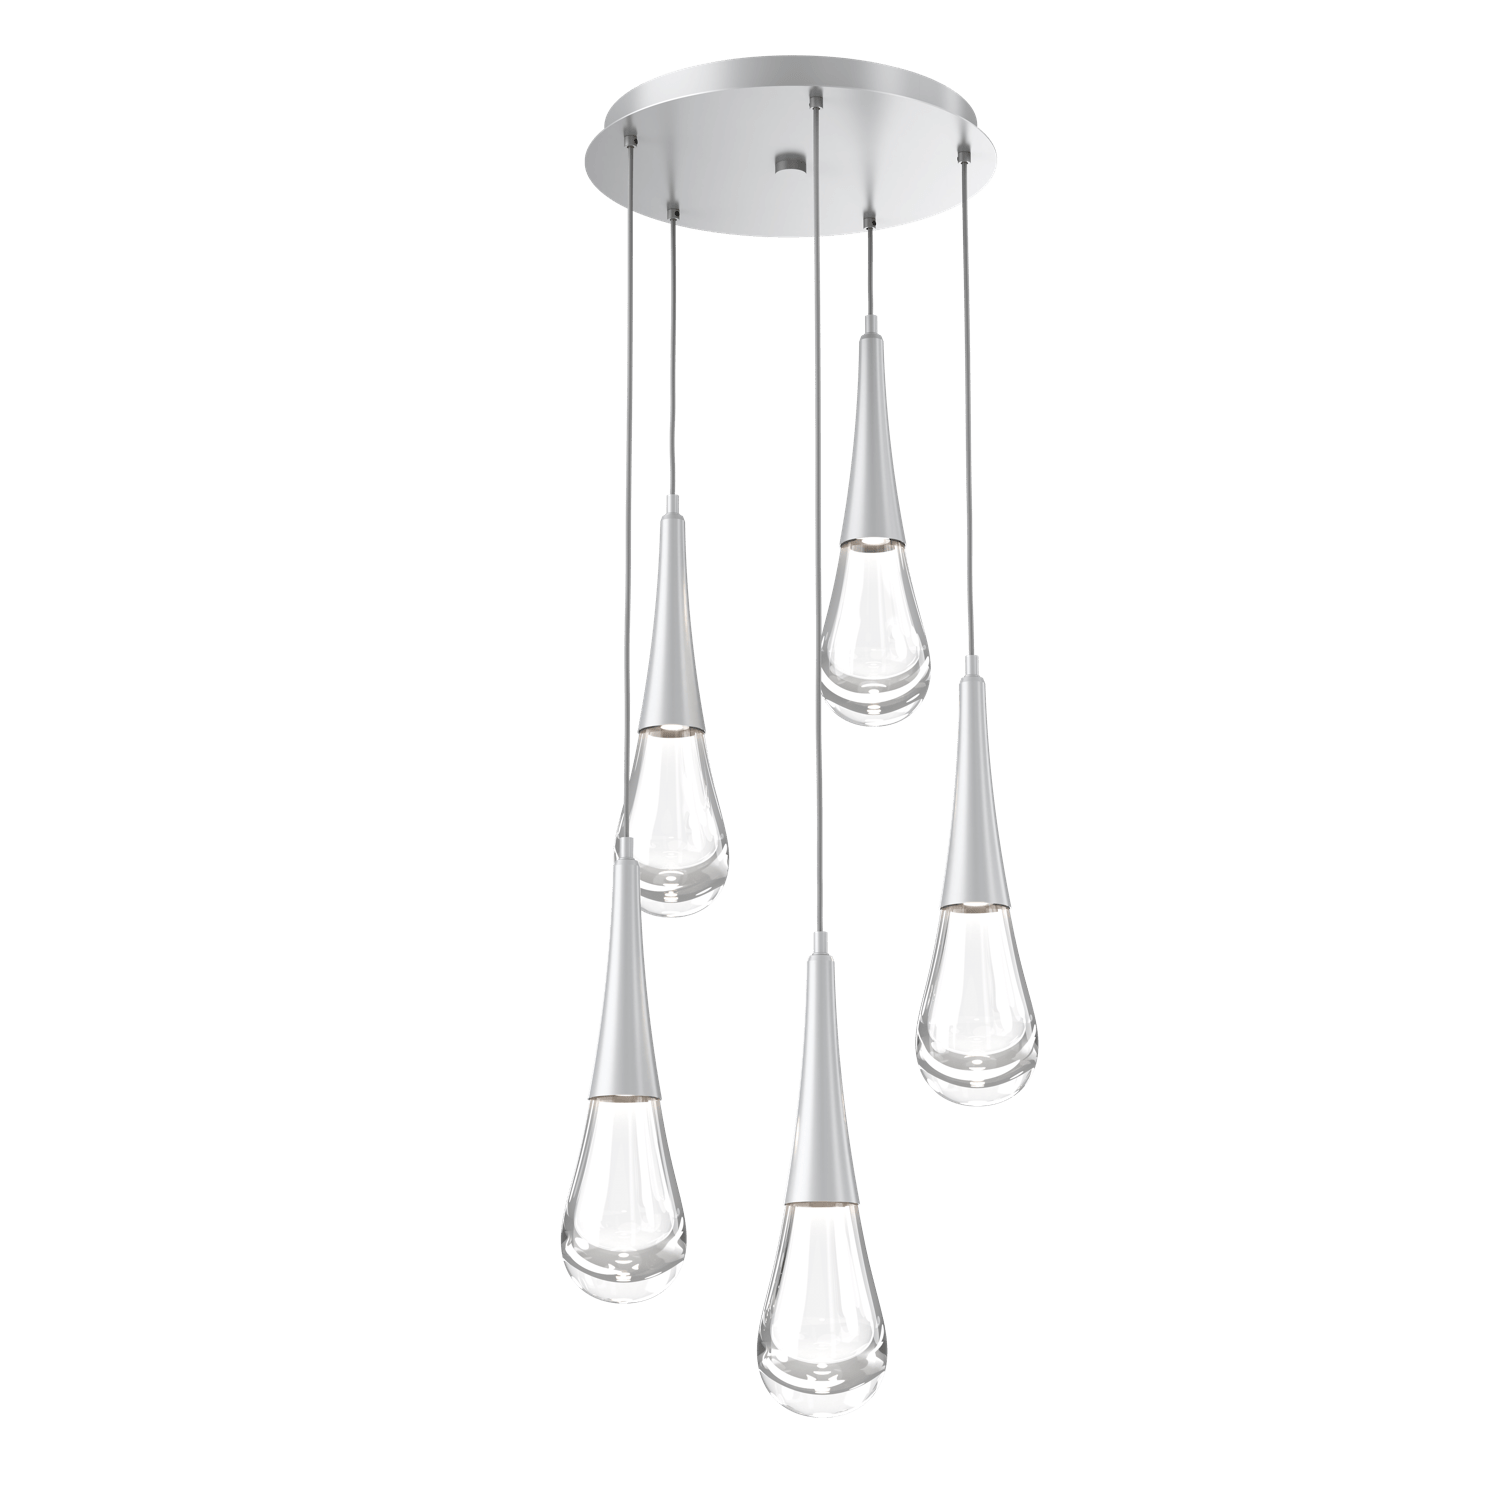 CHB0078-05-CS-Hammerton-Studio-Raindrop-5-light-round-pendant-chandelier-with-classic-silver-finish-and-clear-blown-glass-shades-and-LED-lamping